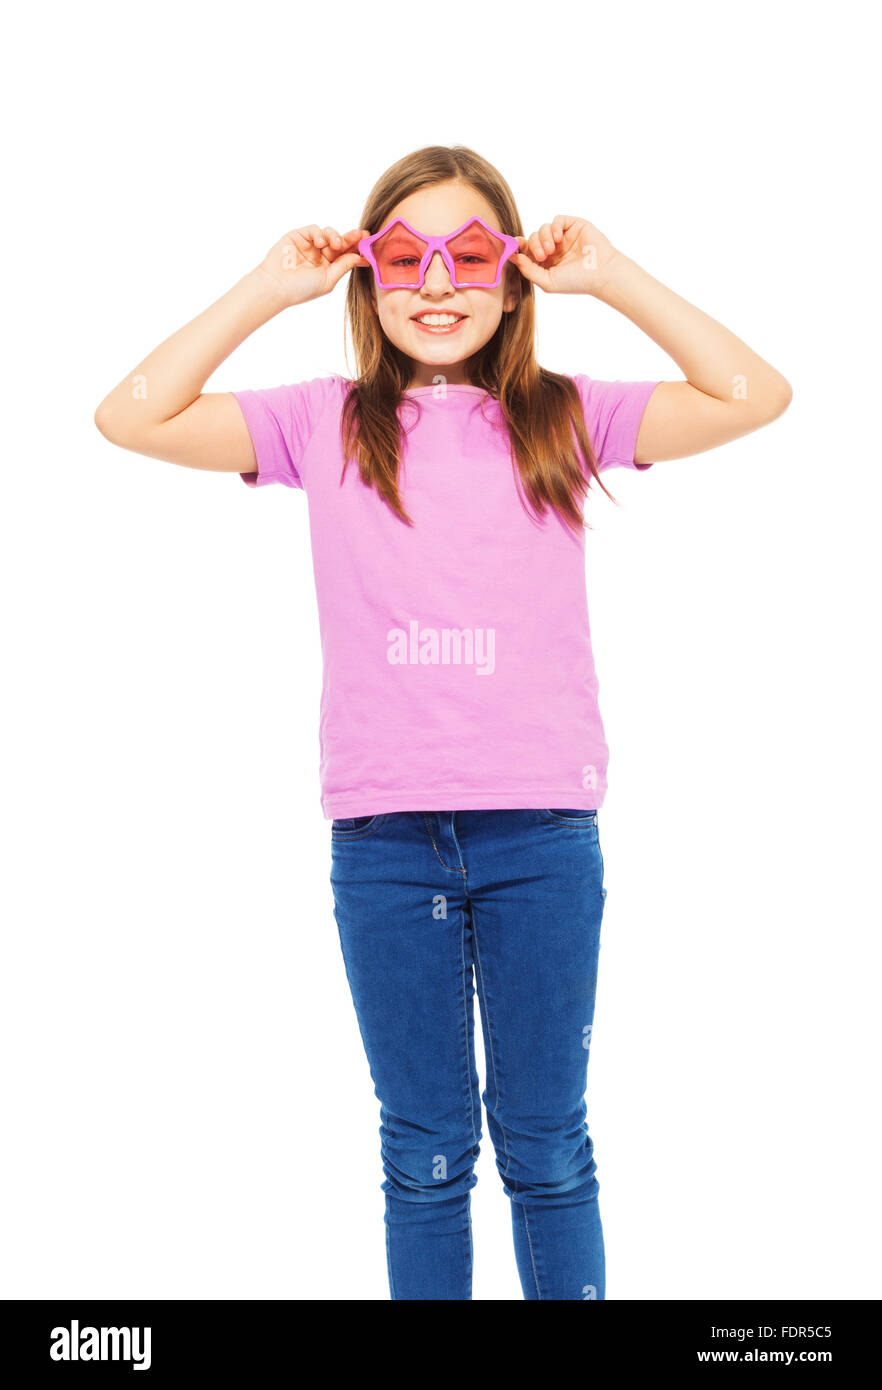 Pretty girl wearing funny pink glasses and t-shirt Stock Photo